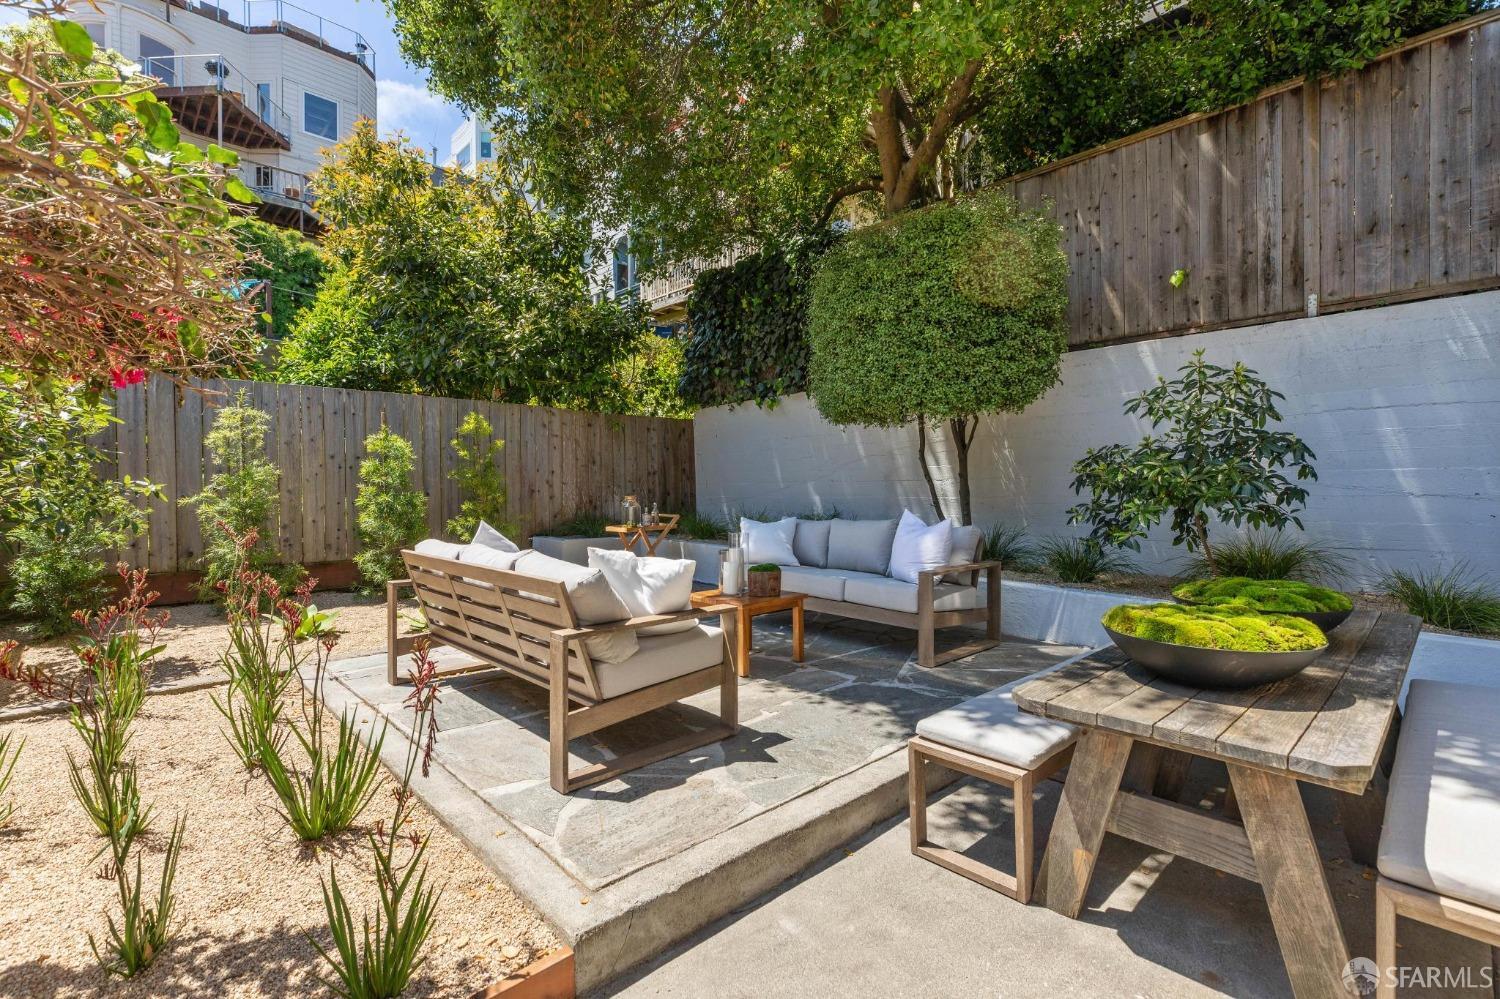 a view of a backyard with table and chairs potted plants and wooden fence